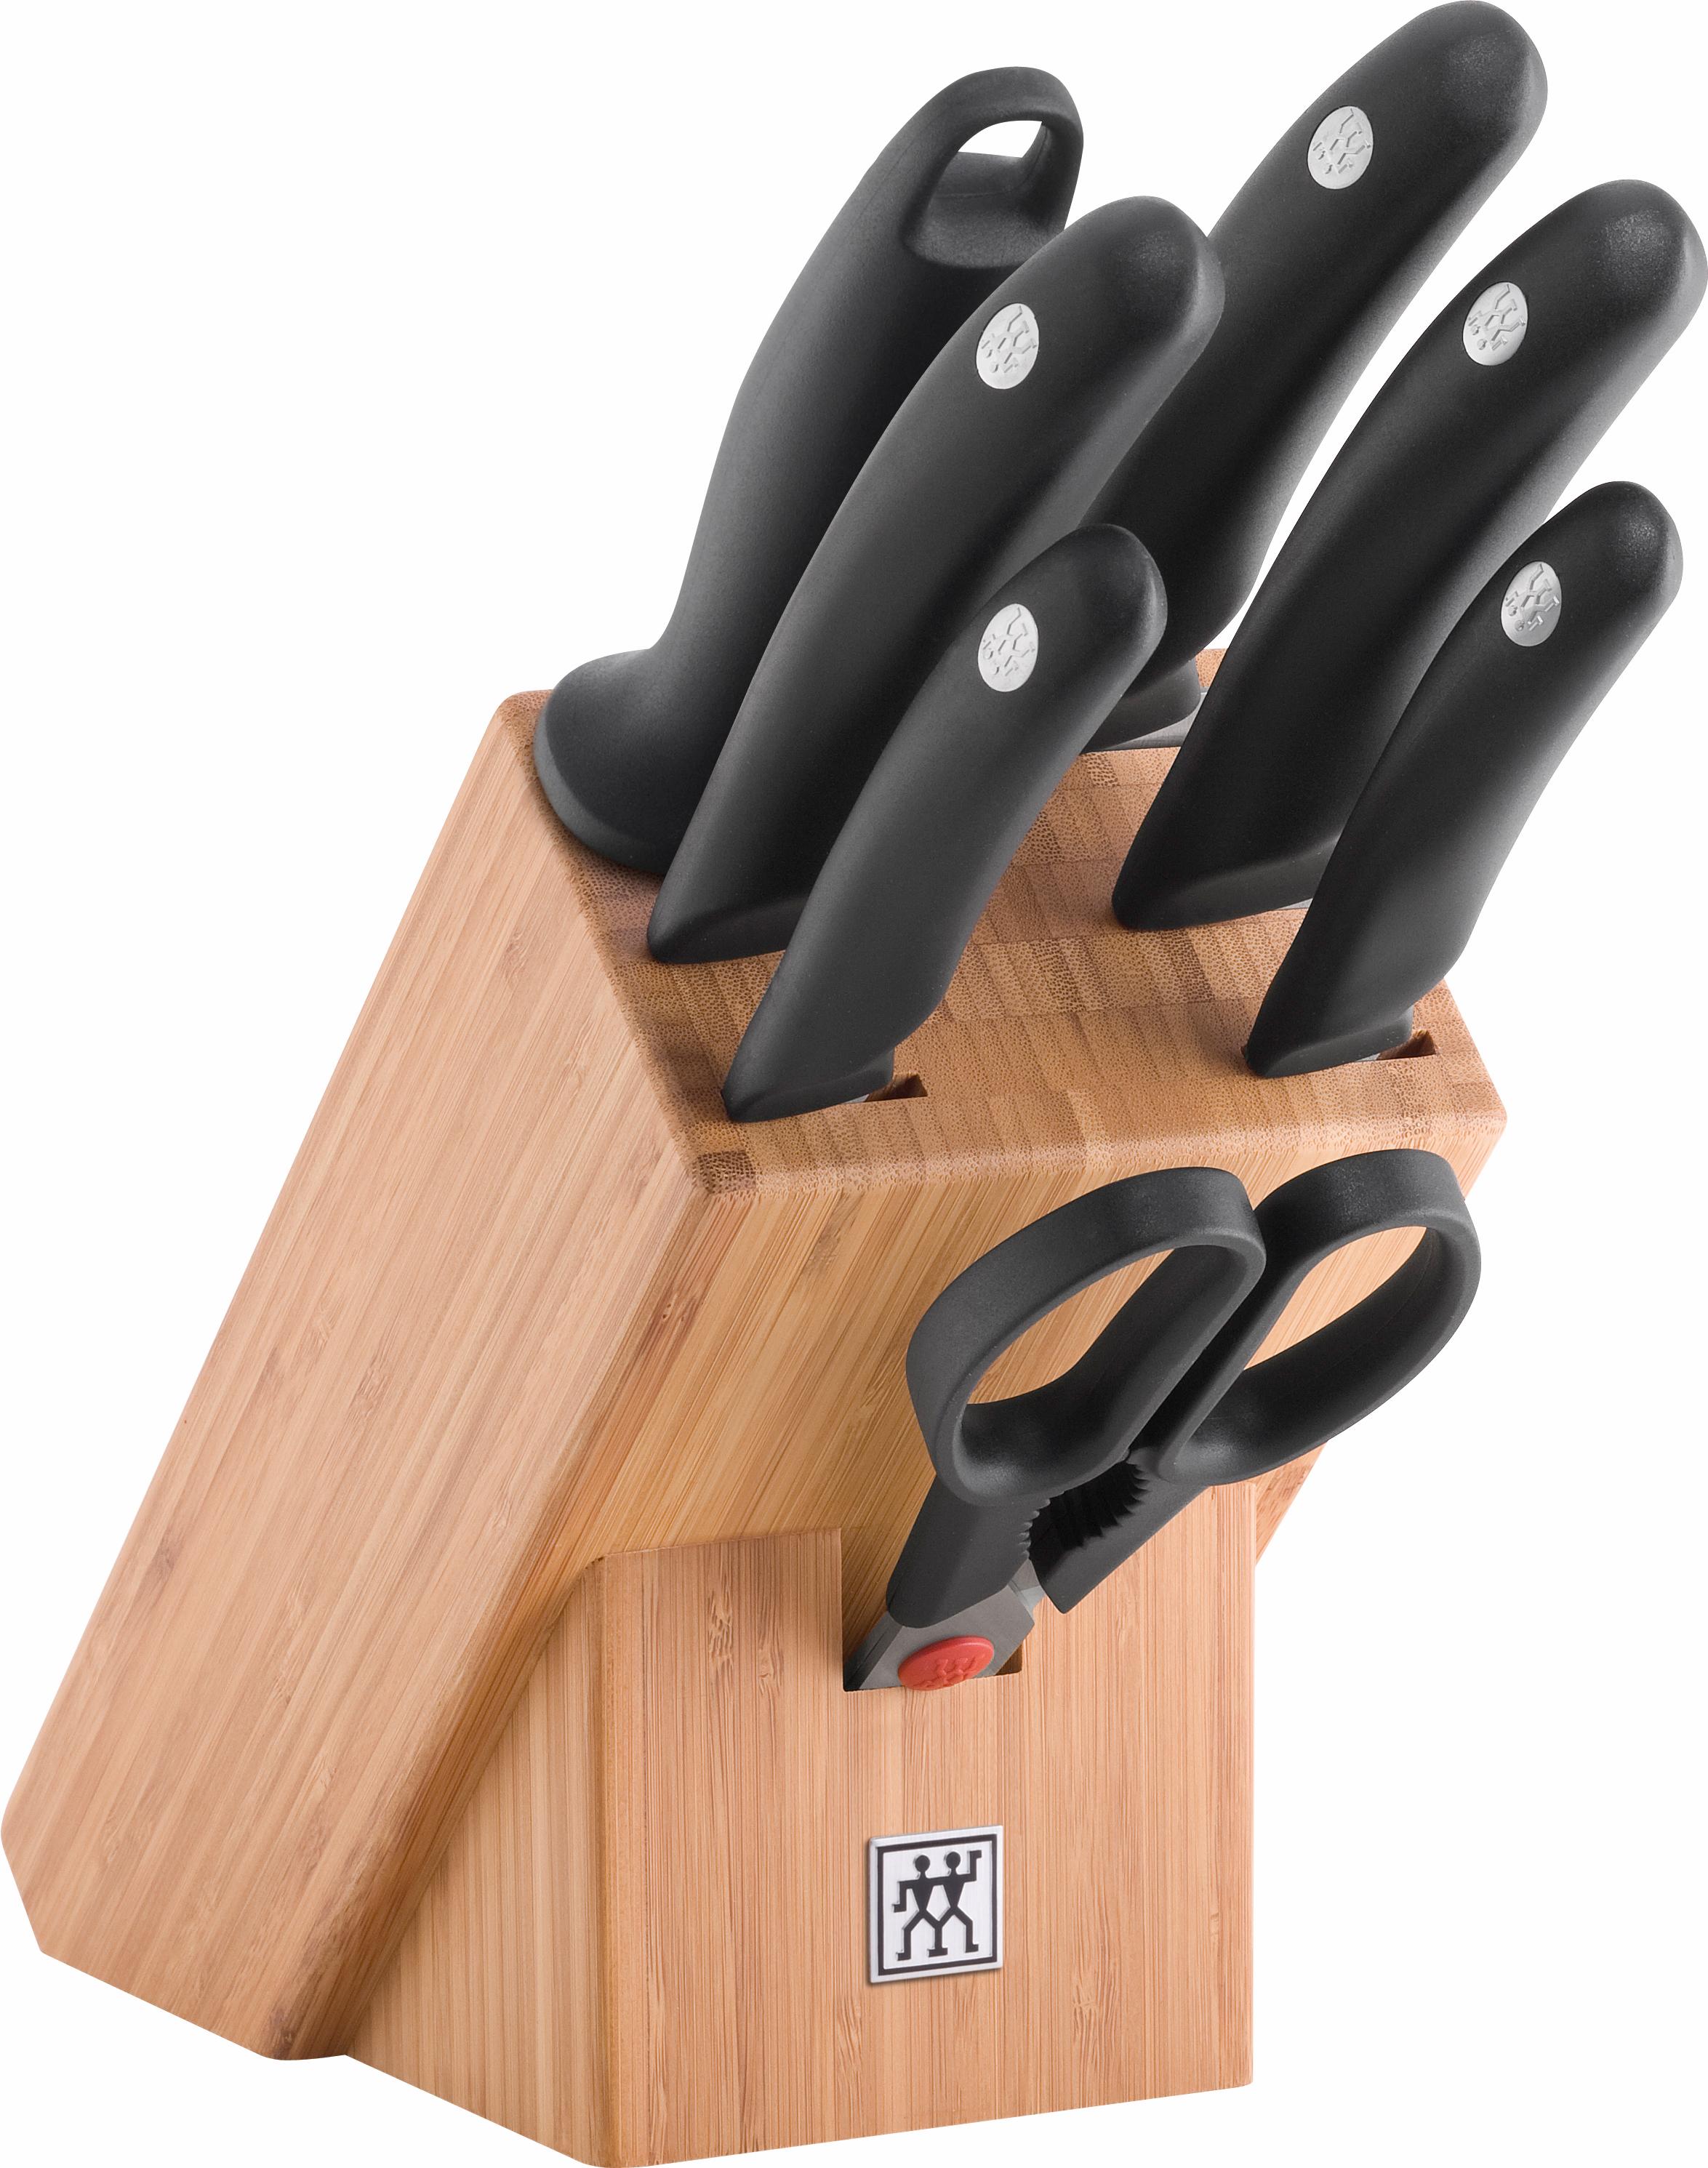 Zwilling Messerblock "STYLE", 8 tlg.